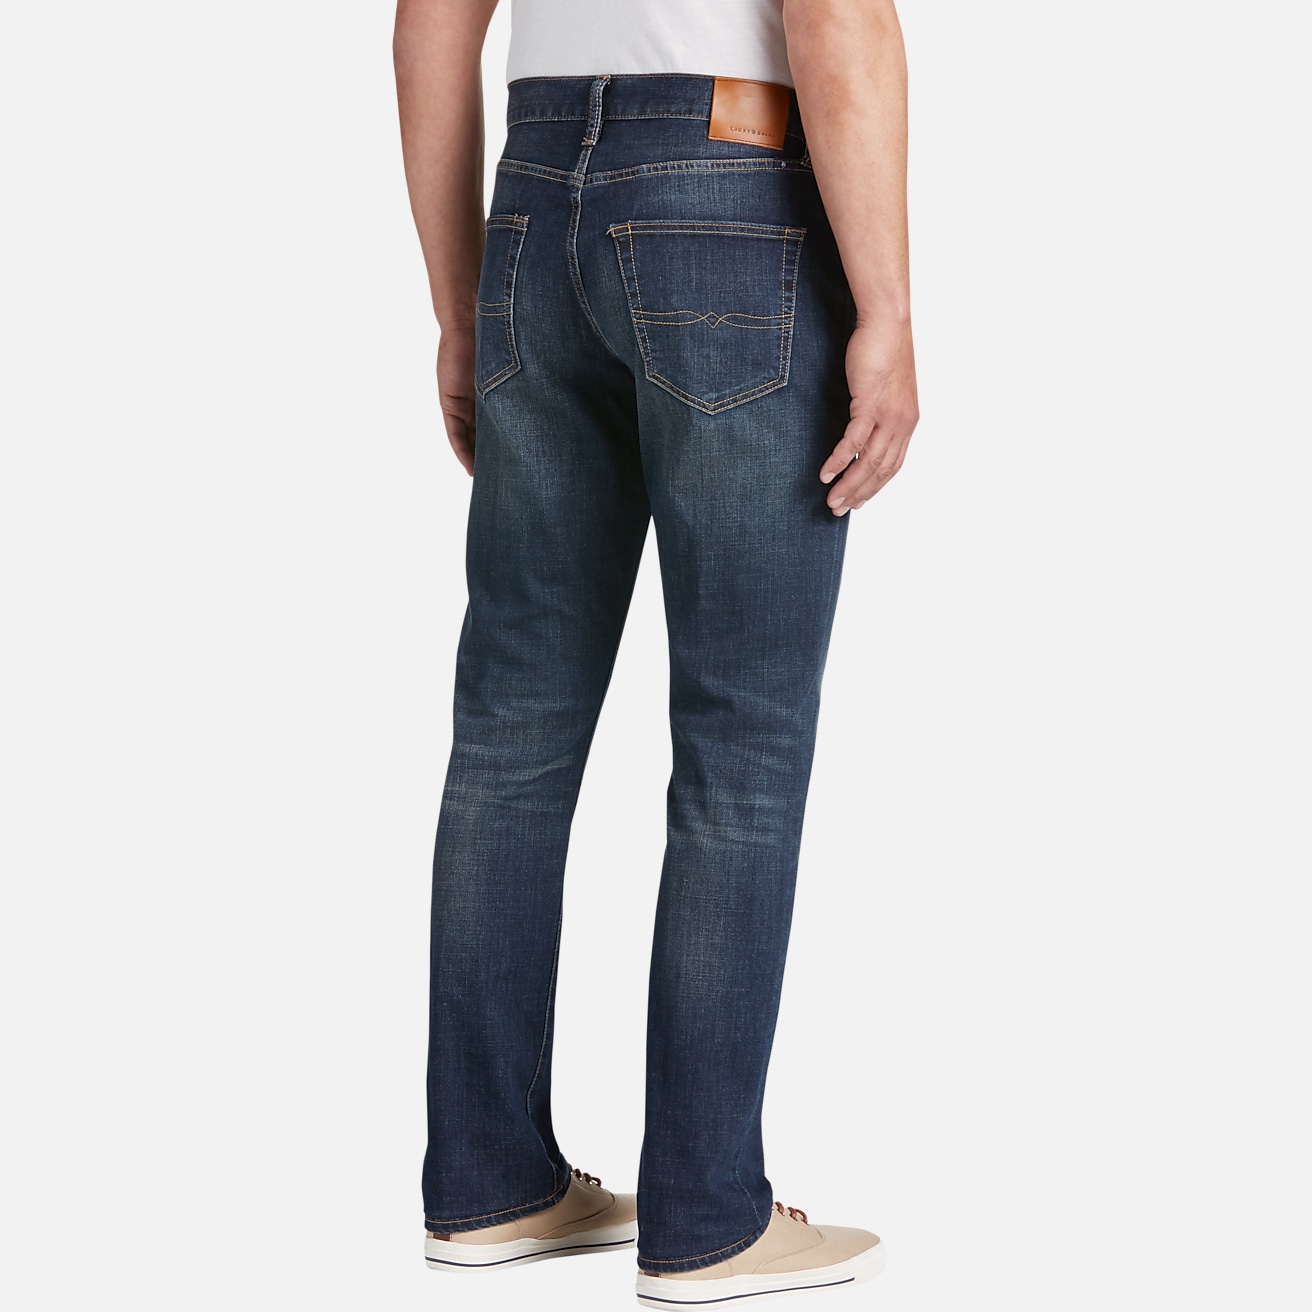 Lucky Brand 410 Athletic Fit Jeans, Jeans, Clothing & Accessories